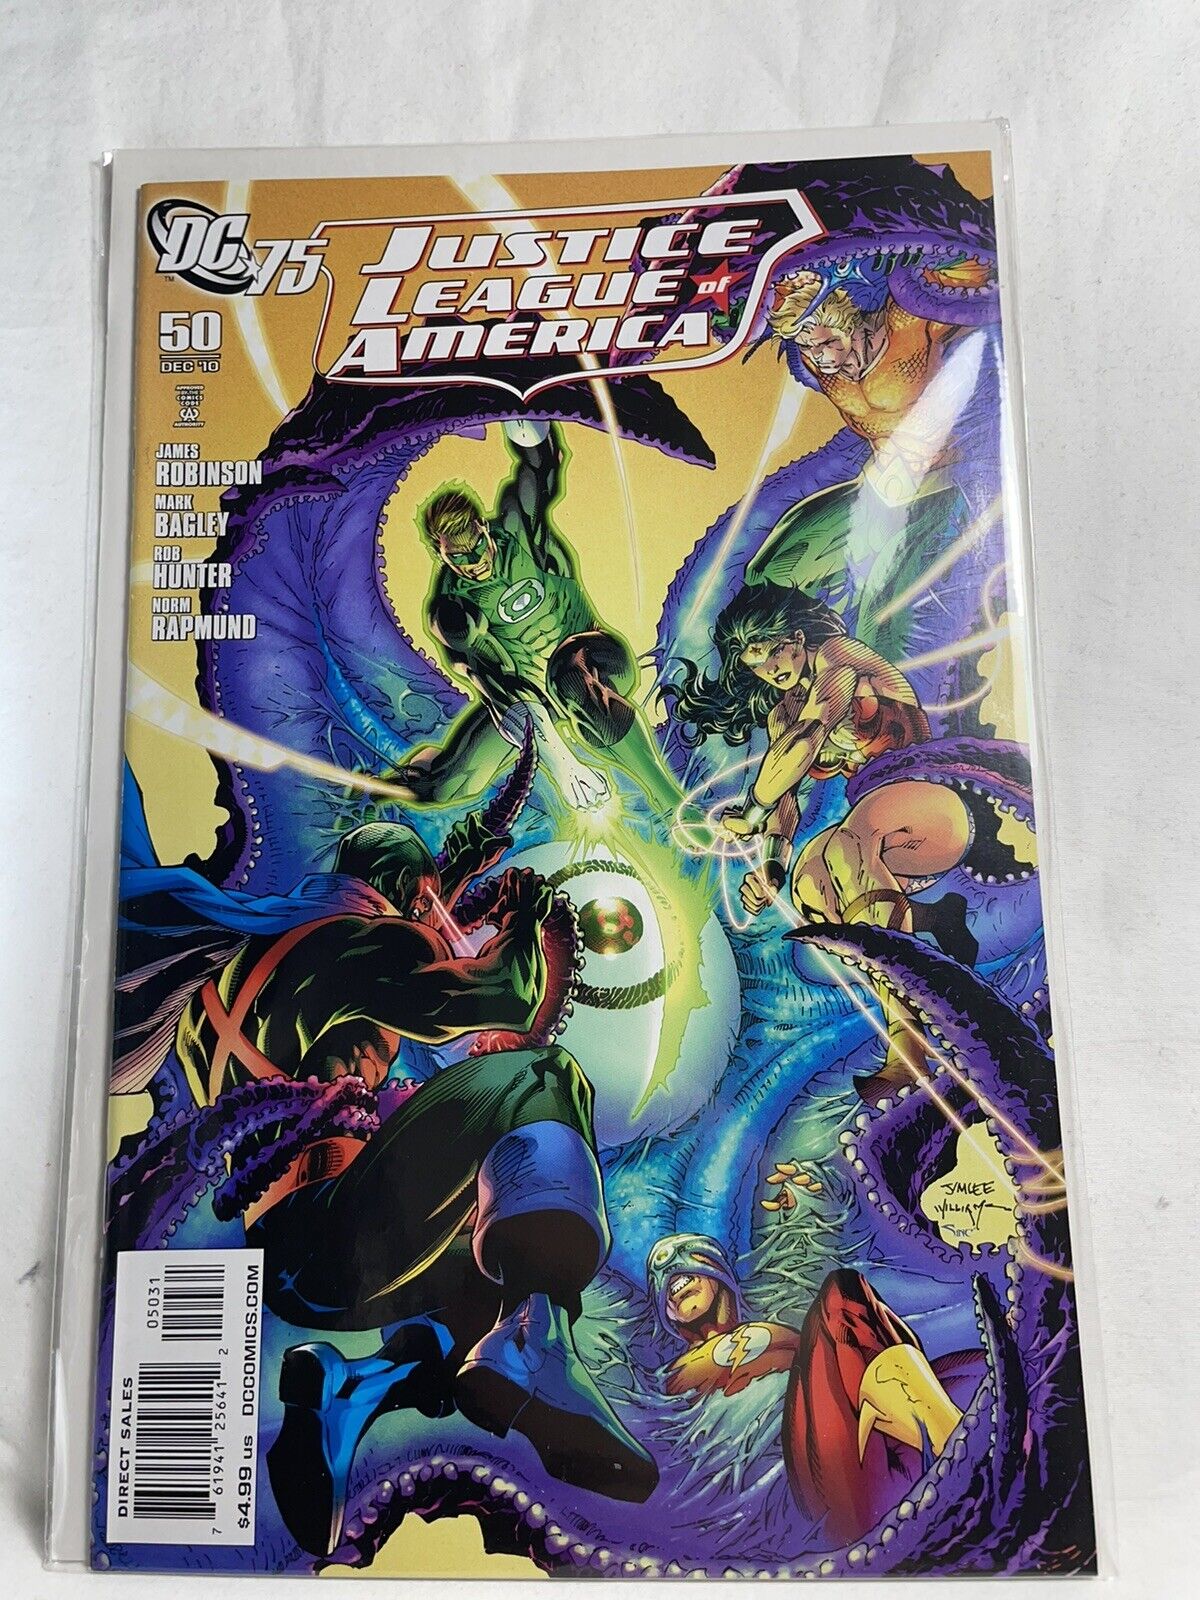 JUSTICE LEAGUE AMERICA #50 Jim Lee Cover 75th Anniversary Retailer Variant 1:75